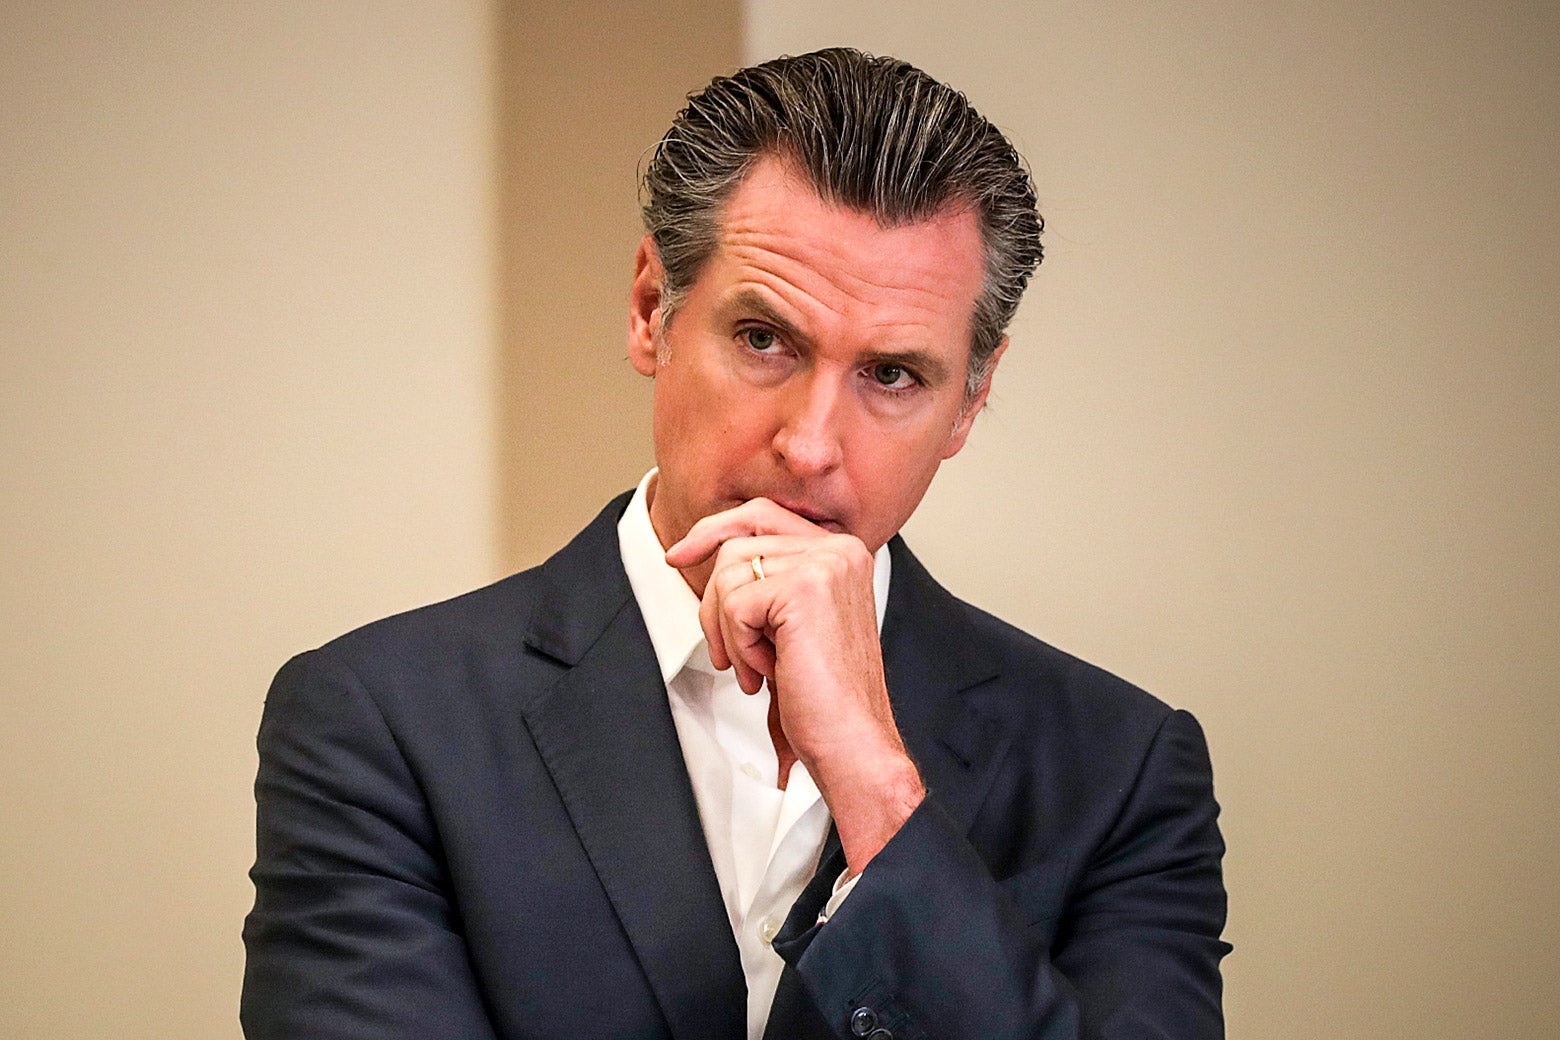 Gov. Gavin Newsom standing with a pensive expression.